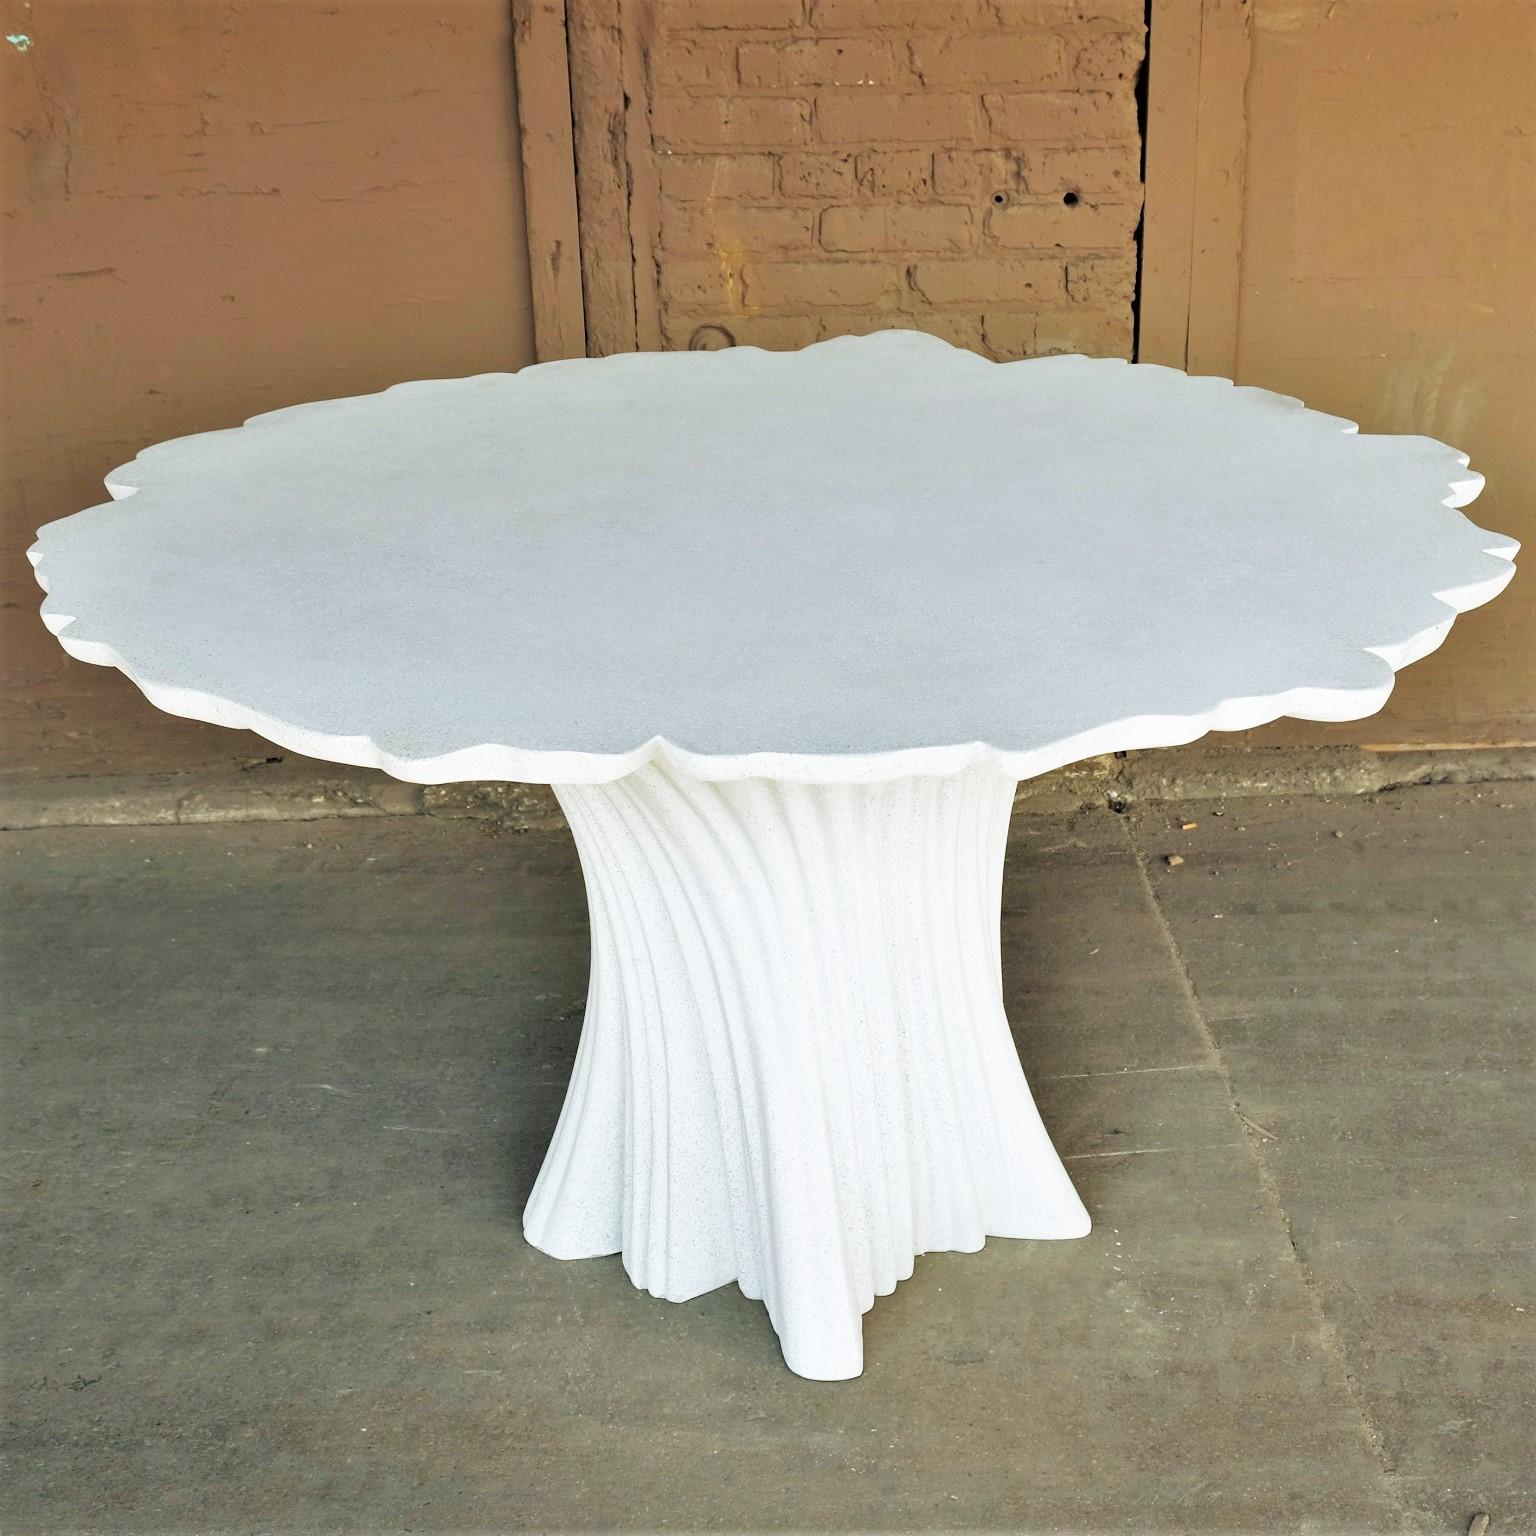 American Cast Resin 'Perennial Cypress' Dining Table, White Stone by Zachary A. Design For Sale